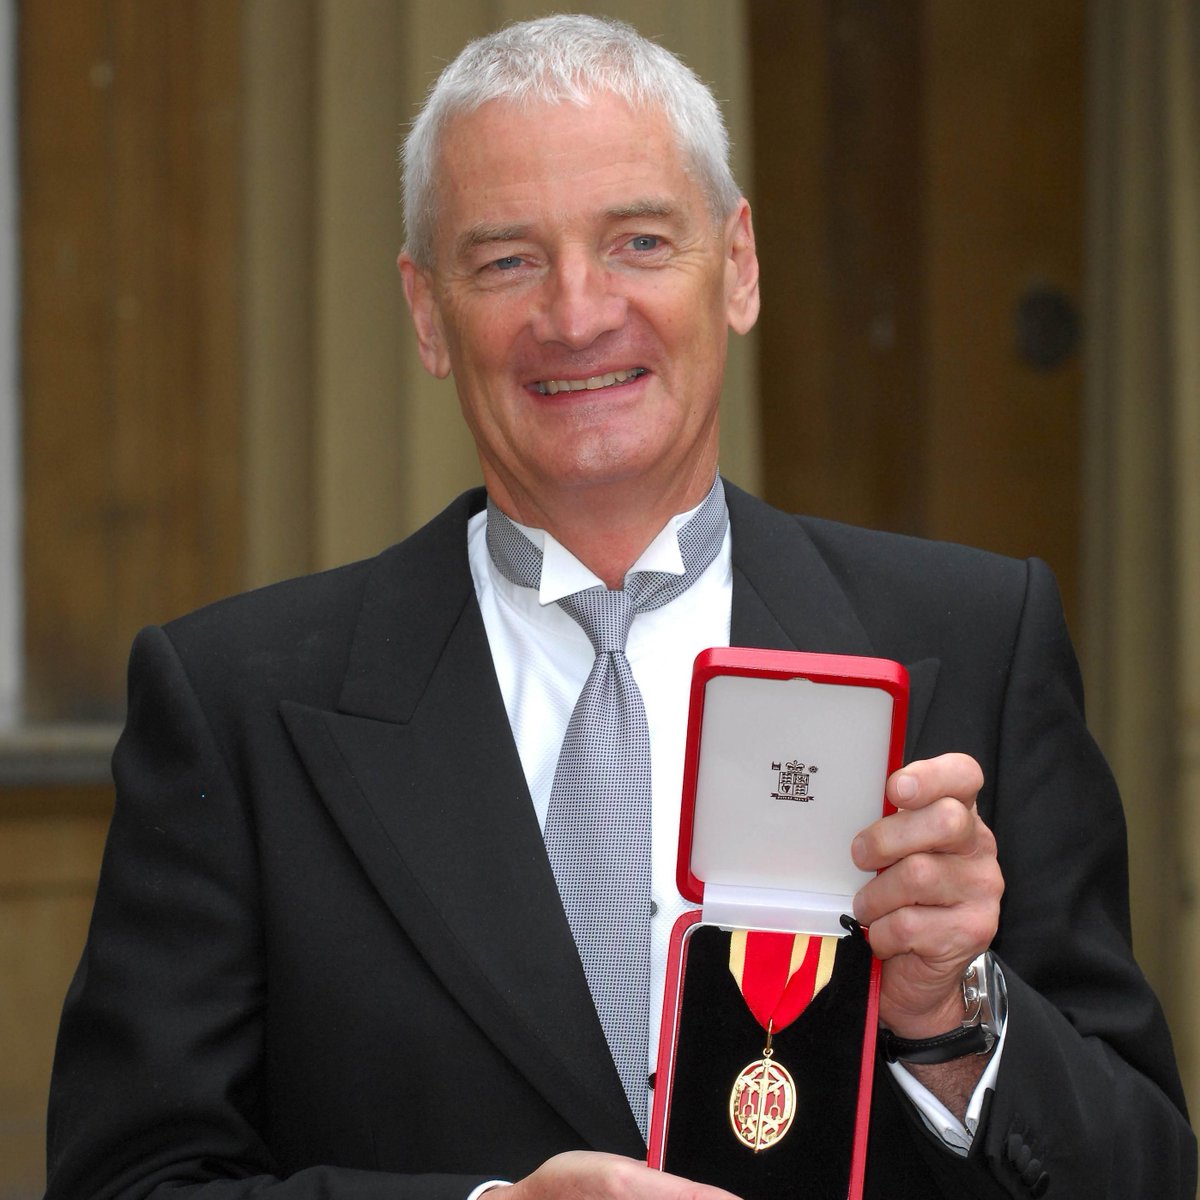 13/ James Dyson was knighted in 2006 by Prince Charles, formally becoming Sir James Dyson.He established the James Dyson Foundation in 2002, focusing his giving on supporting design and engineering education initiatives.He remains an active, obsessive tinkerer to this day.